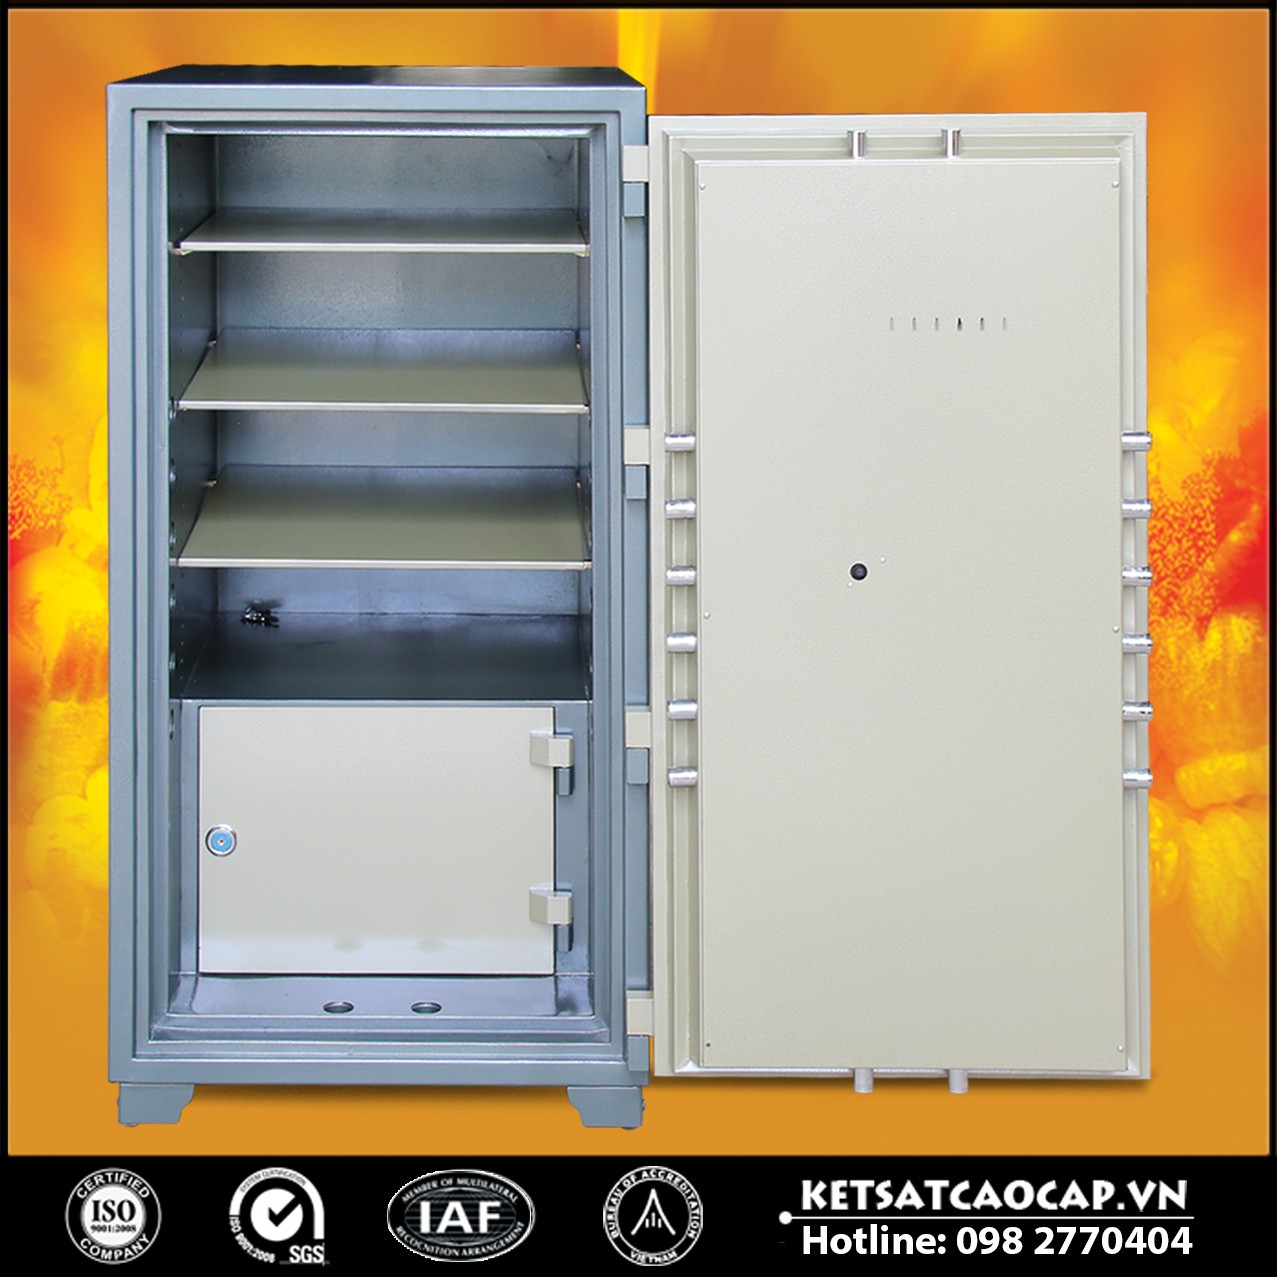 Best Home Safes High Quality, Factory Price uy tín